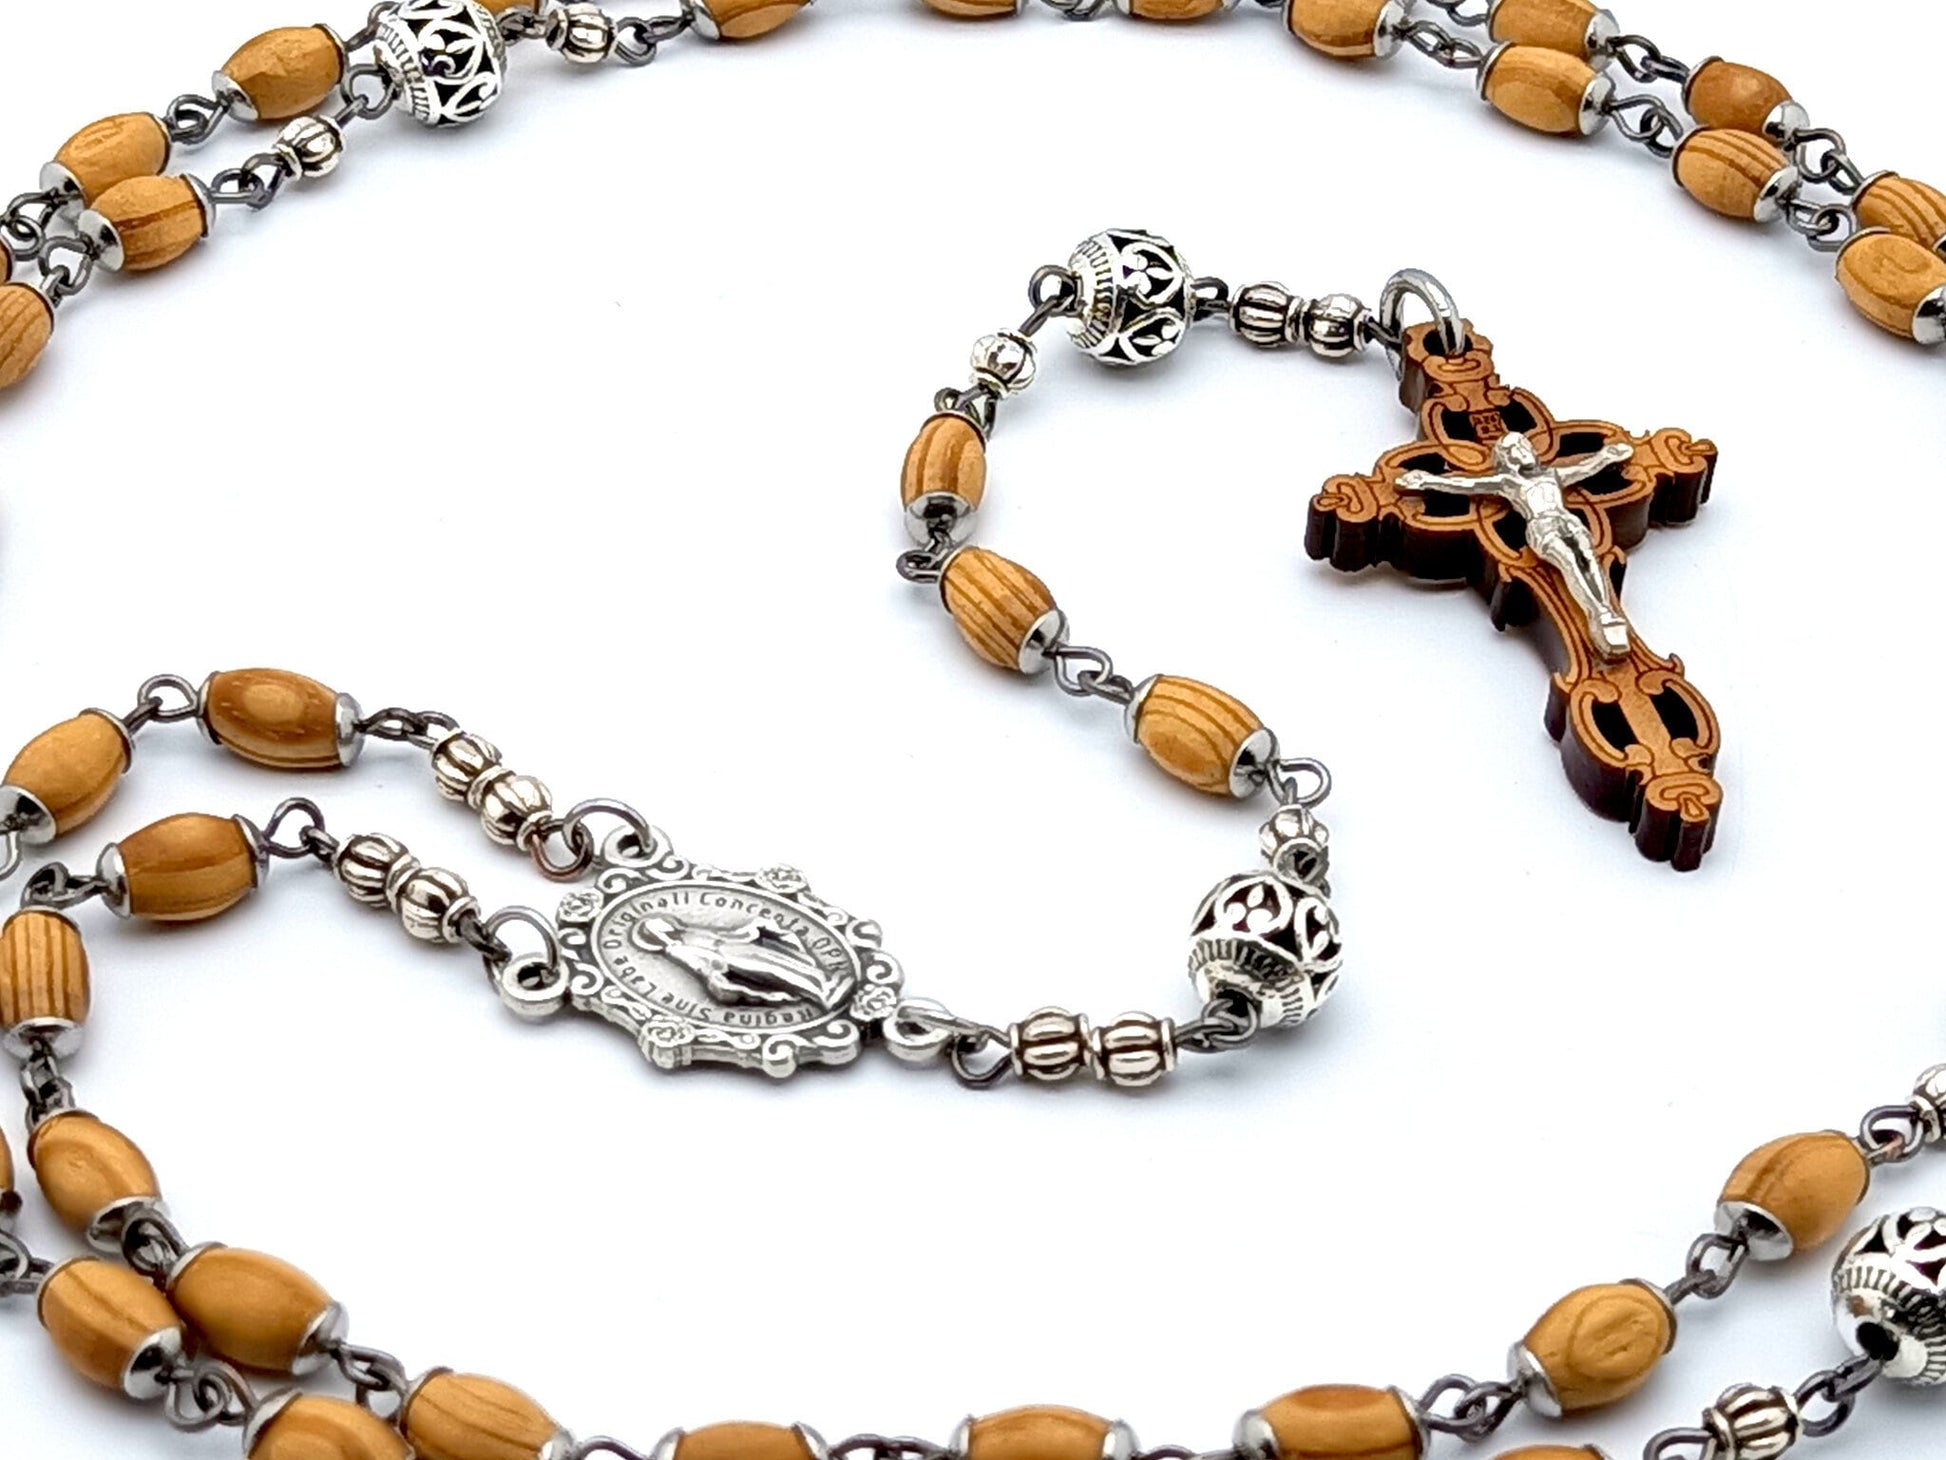 Miraculous medal unique rosary beads with wooden rice shaped beads, silver filigree pater beads, olivewood crucifix and miraculous medal centre. 